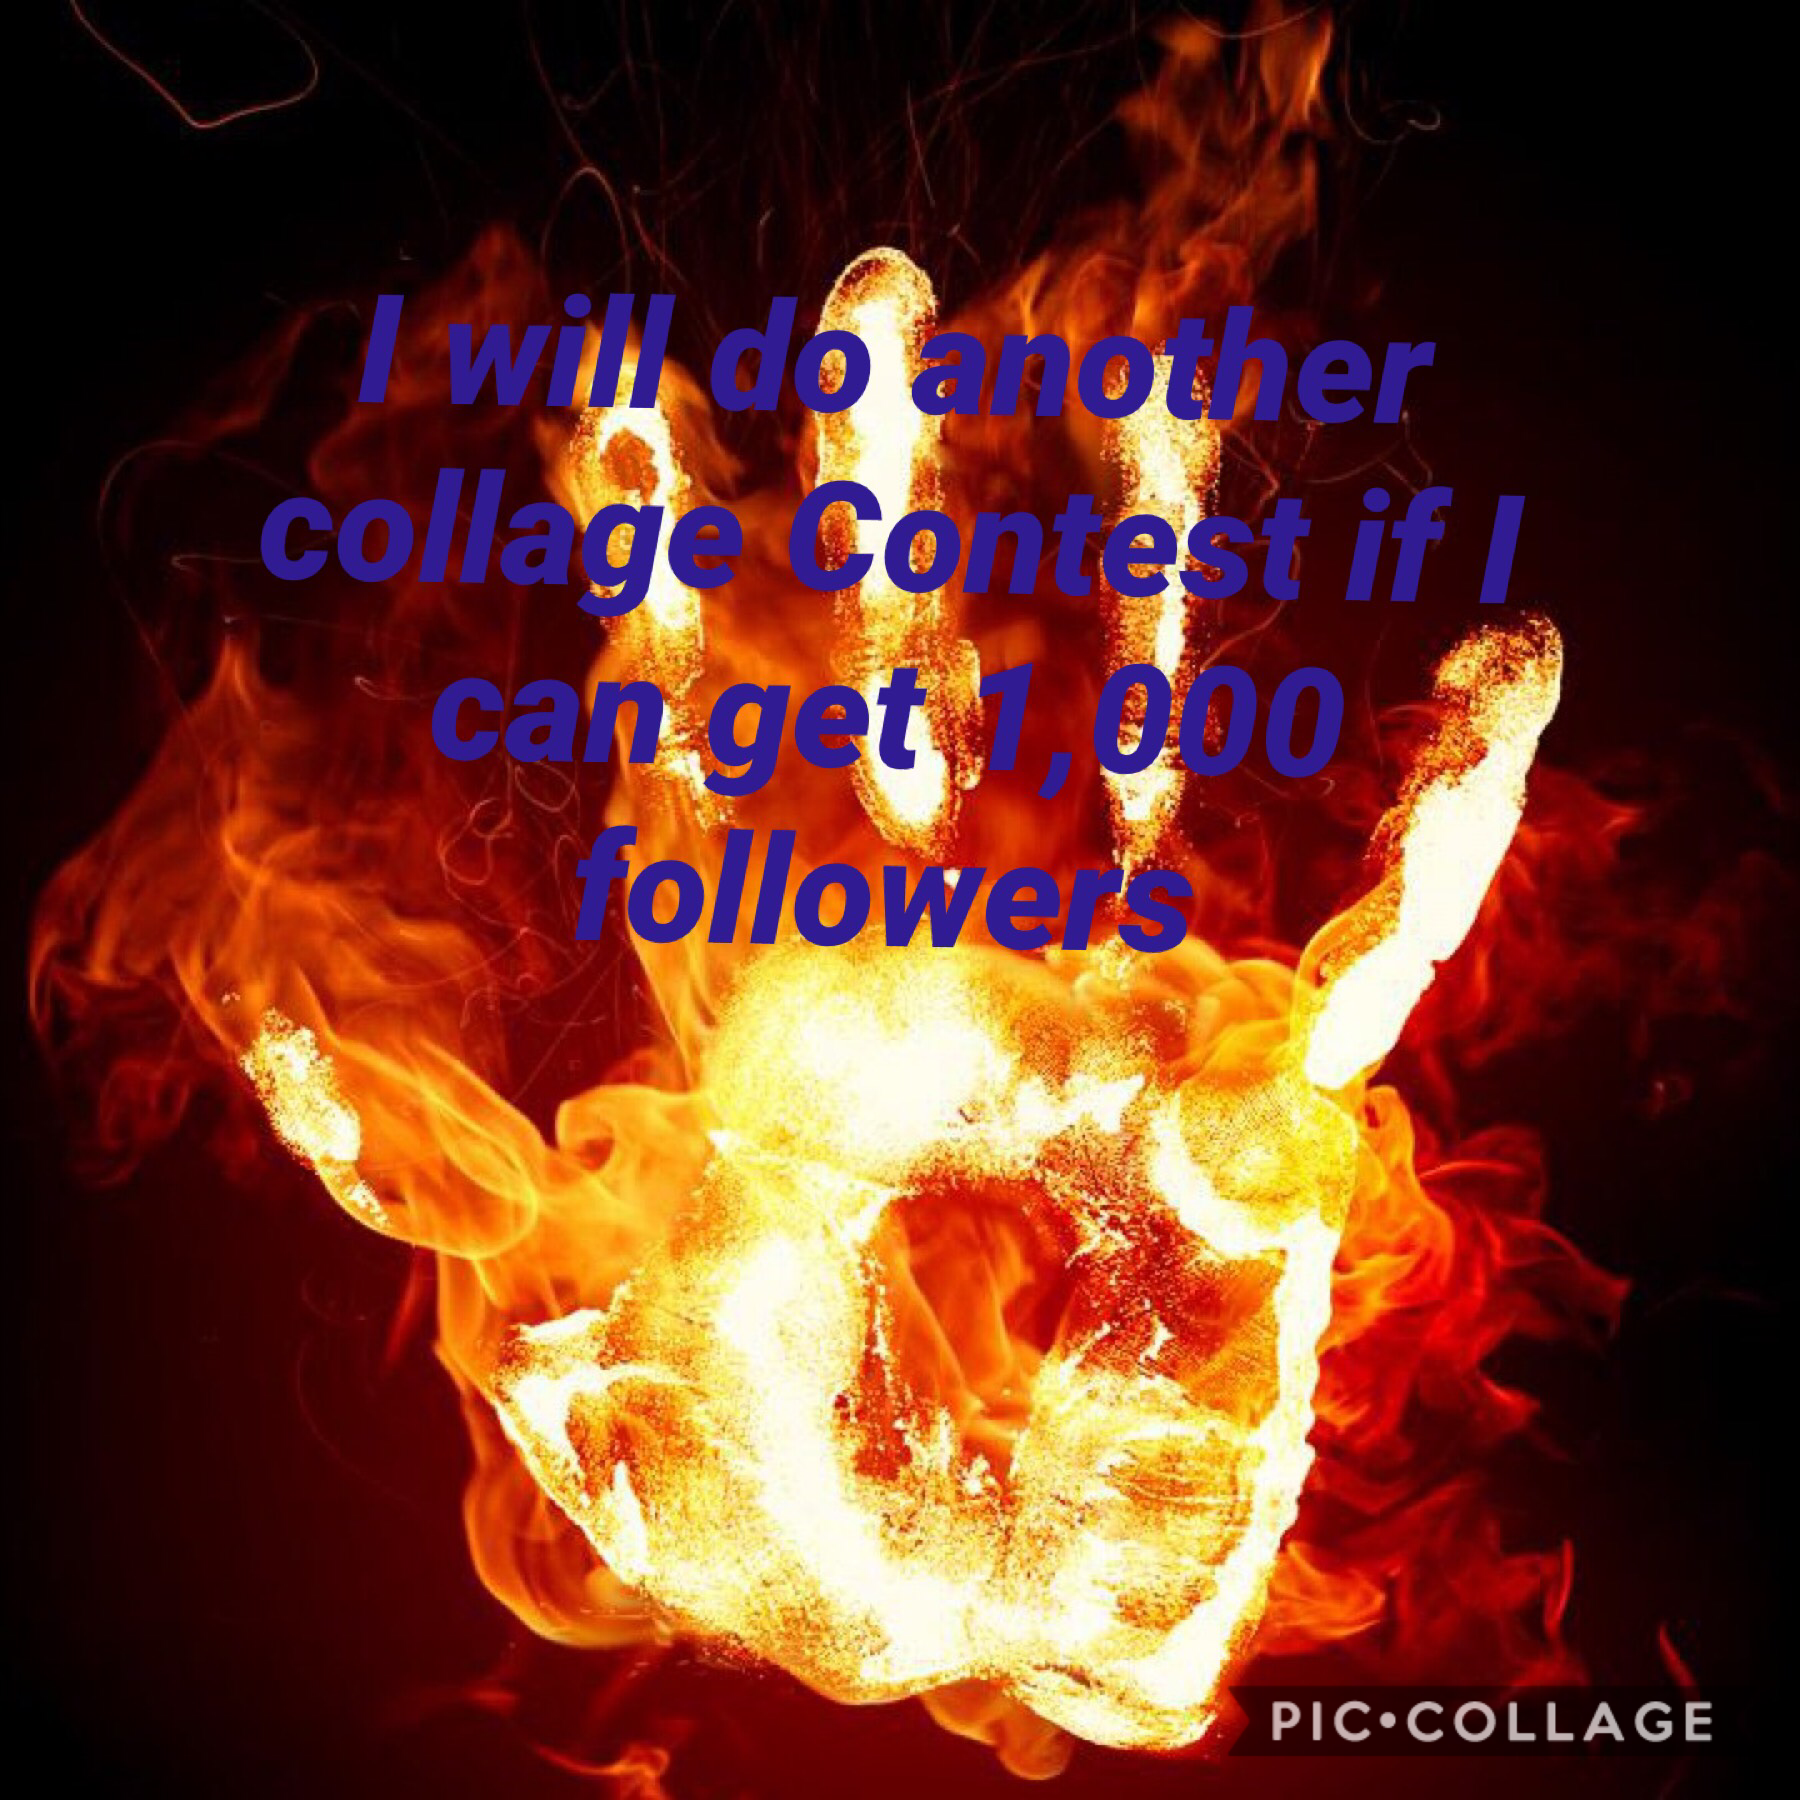 Collage Contest at 1,000 followers 